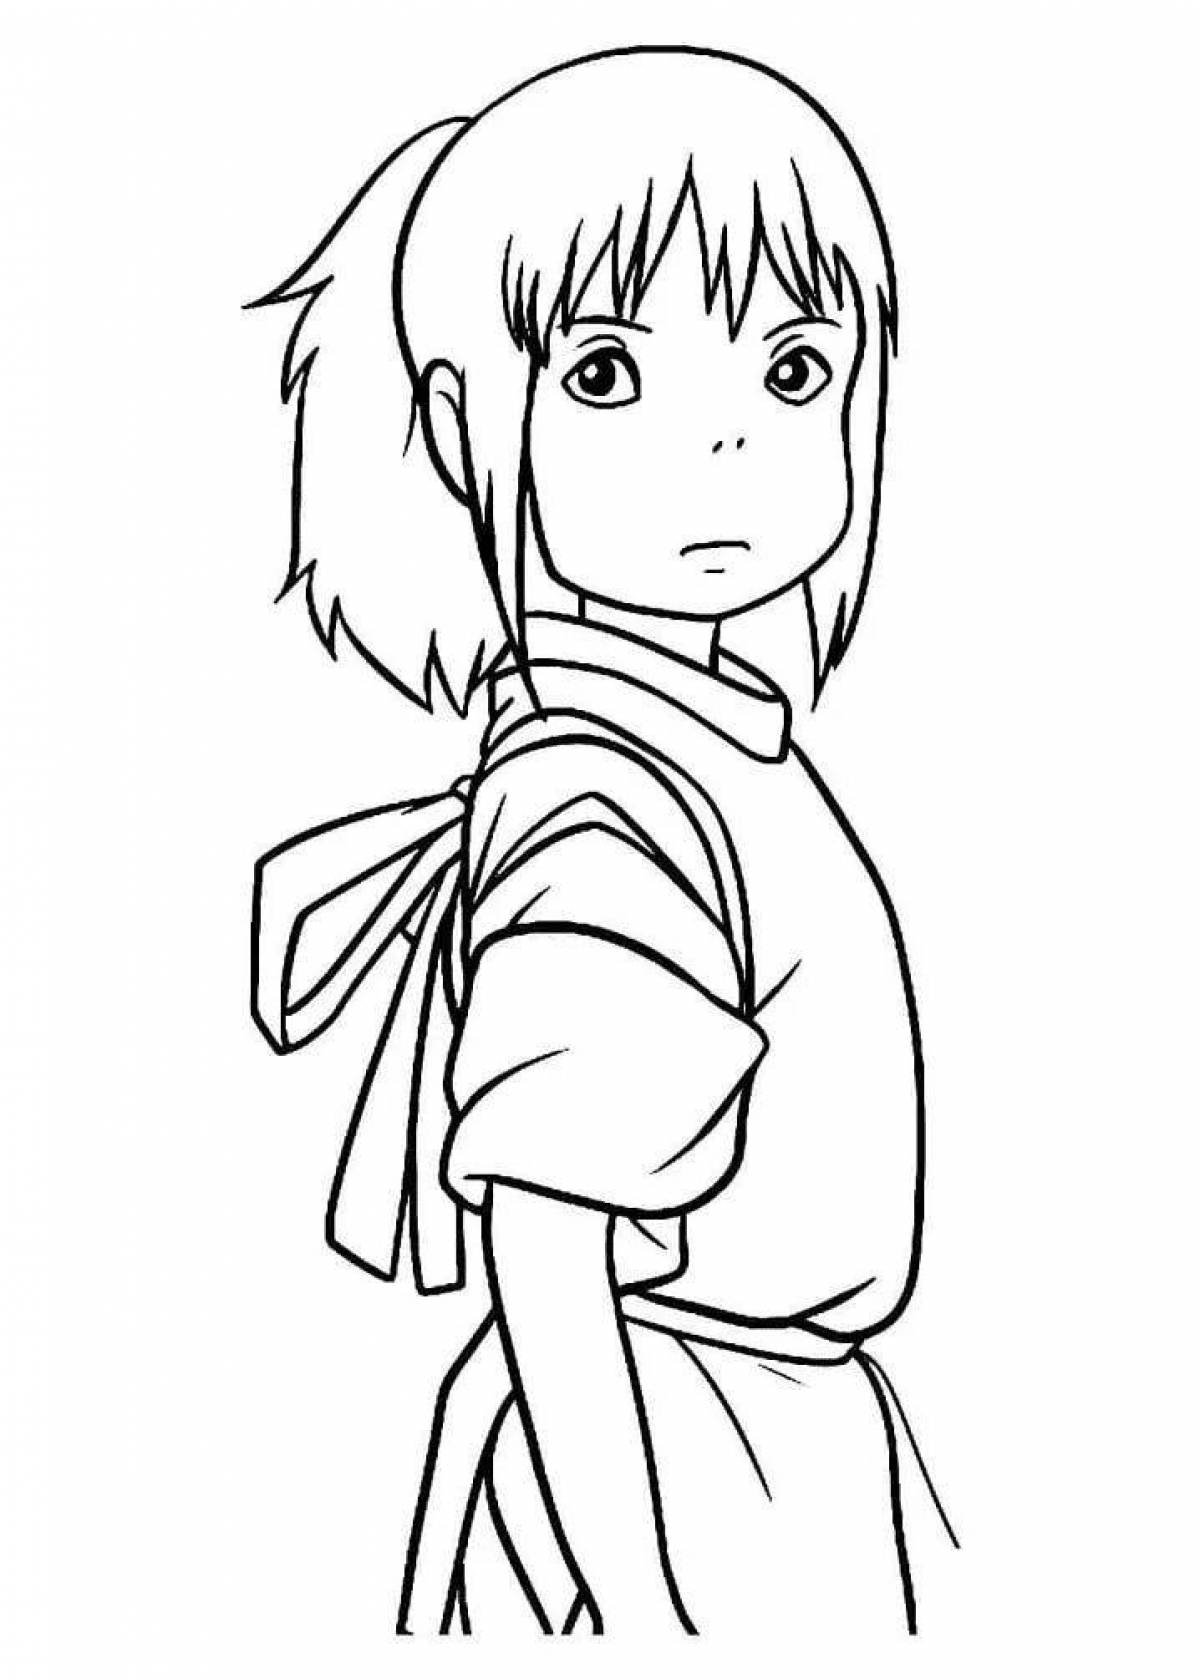 Chihiro and Haku's adorable coloring page